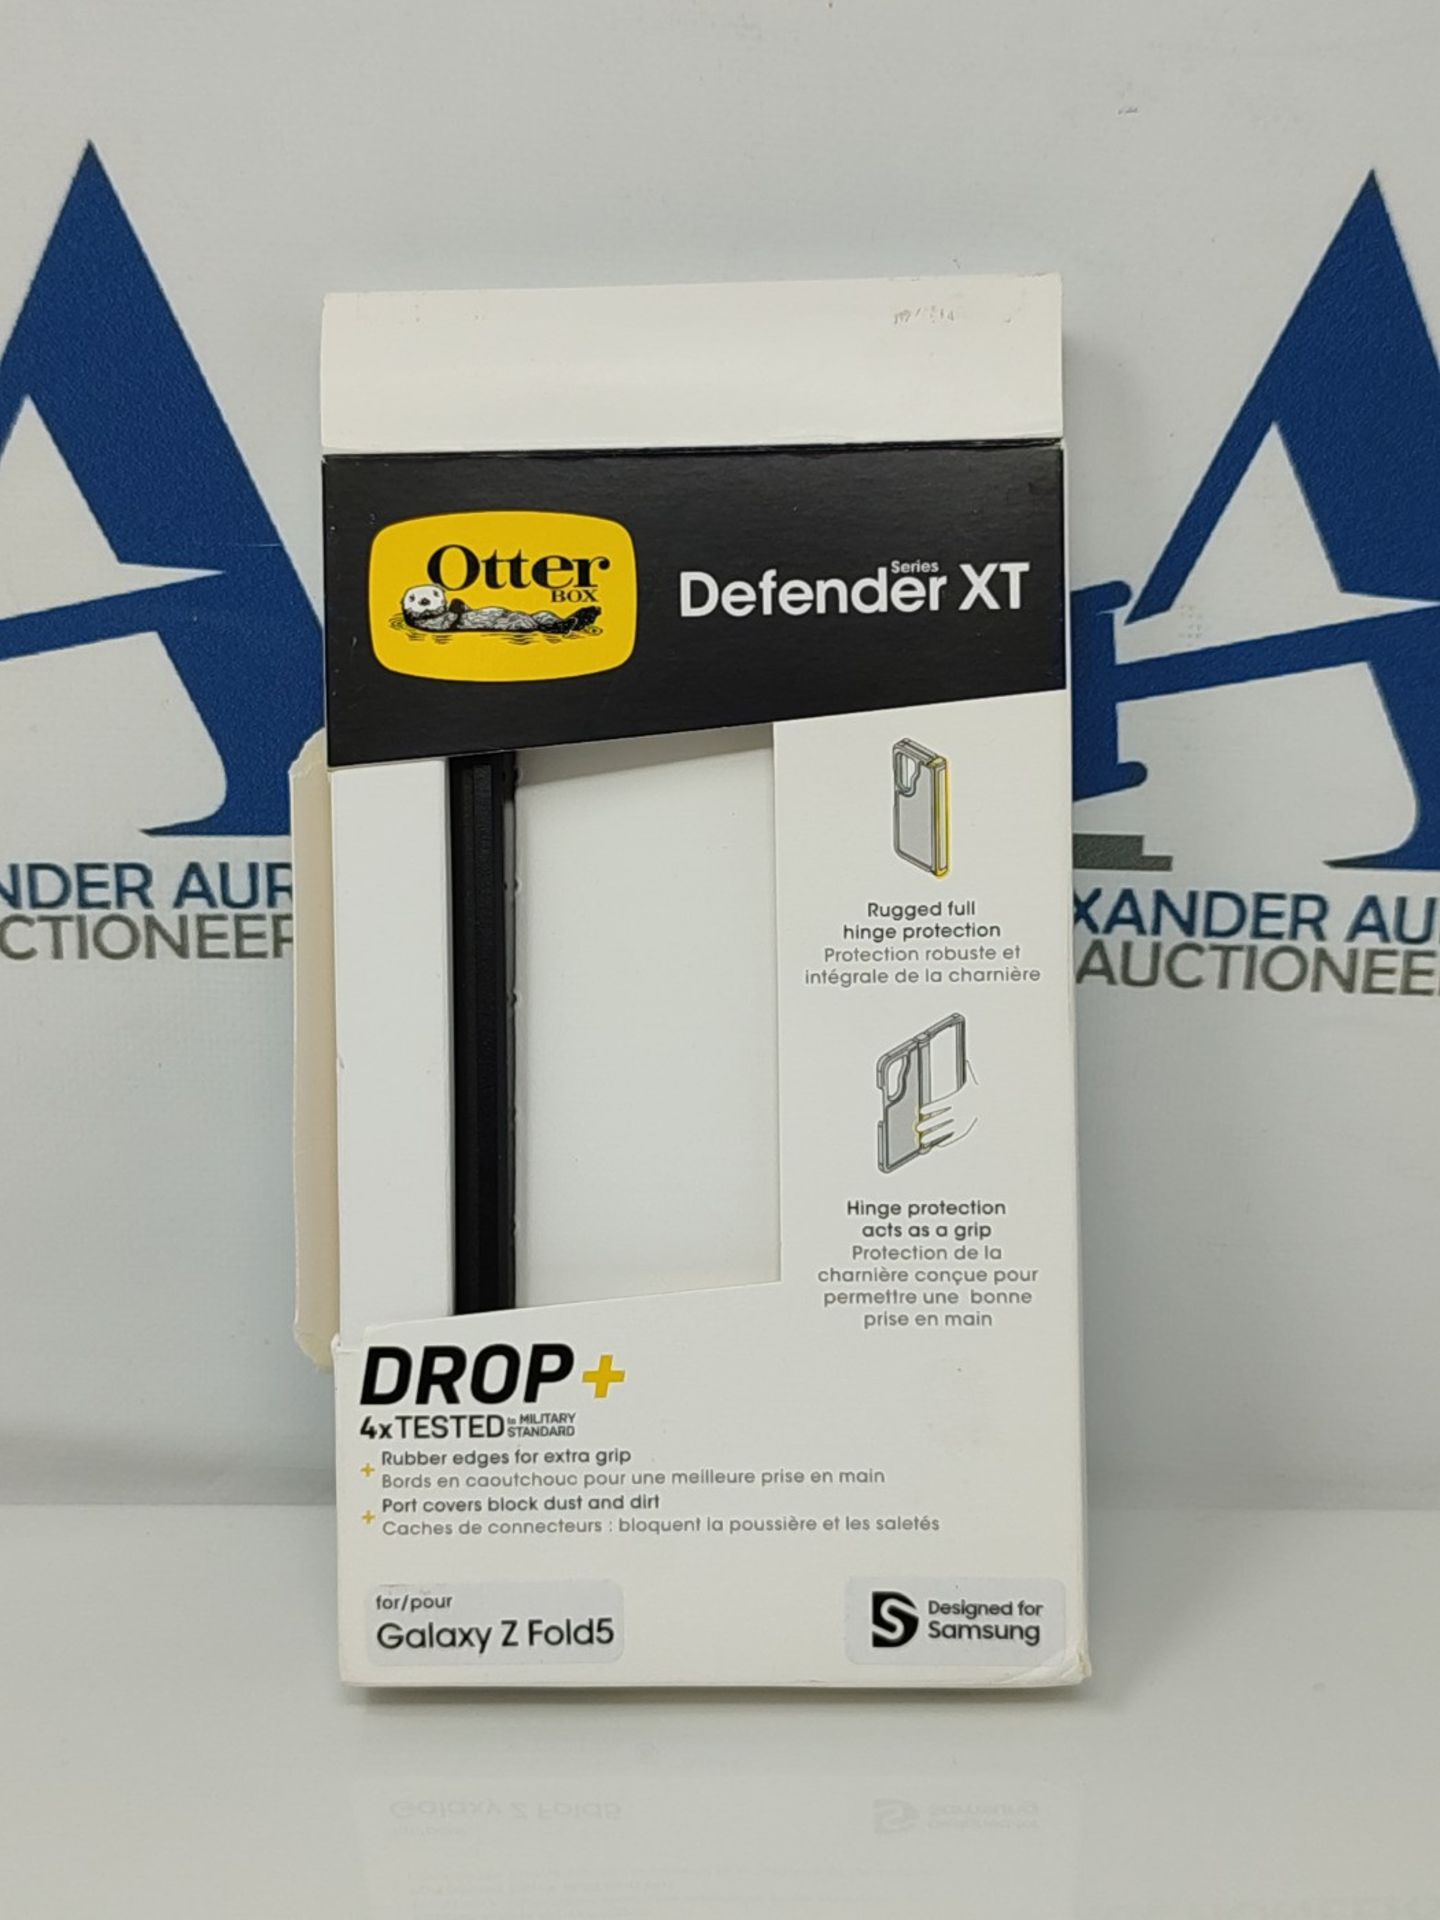 OtterBox Defender XT Case for Samsung Galaxy Z Fold5, Shockproof, Drop proof, Ultra-Ru - Image 2 of 3